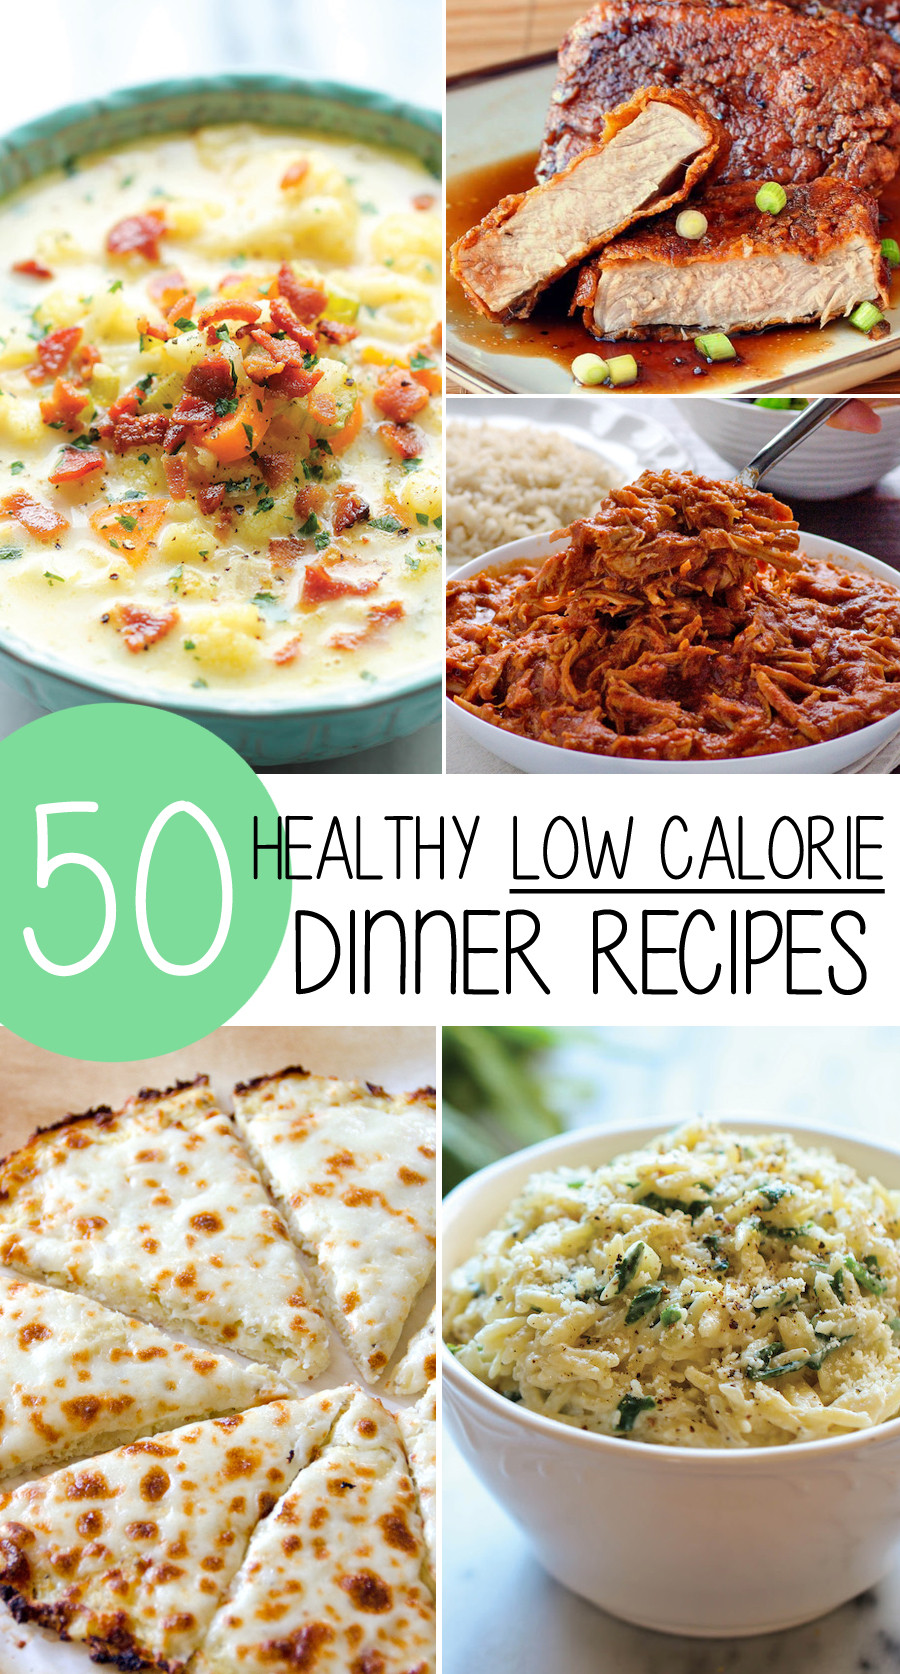 Dinner Ideas For Weight Loss
 50 Healthy Low Calorie Weight Loss Dinner Recipes